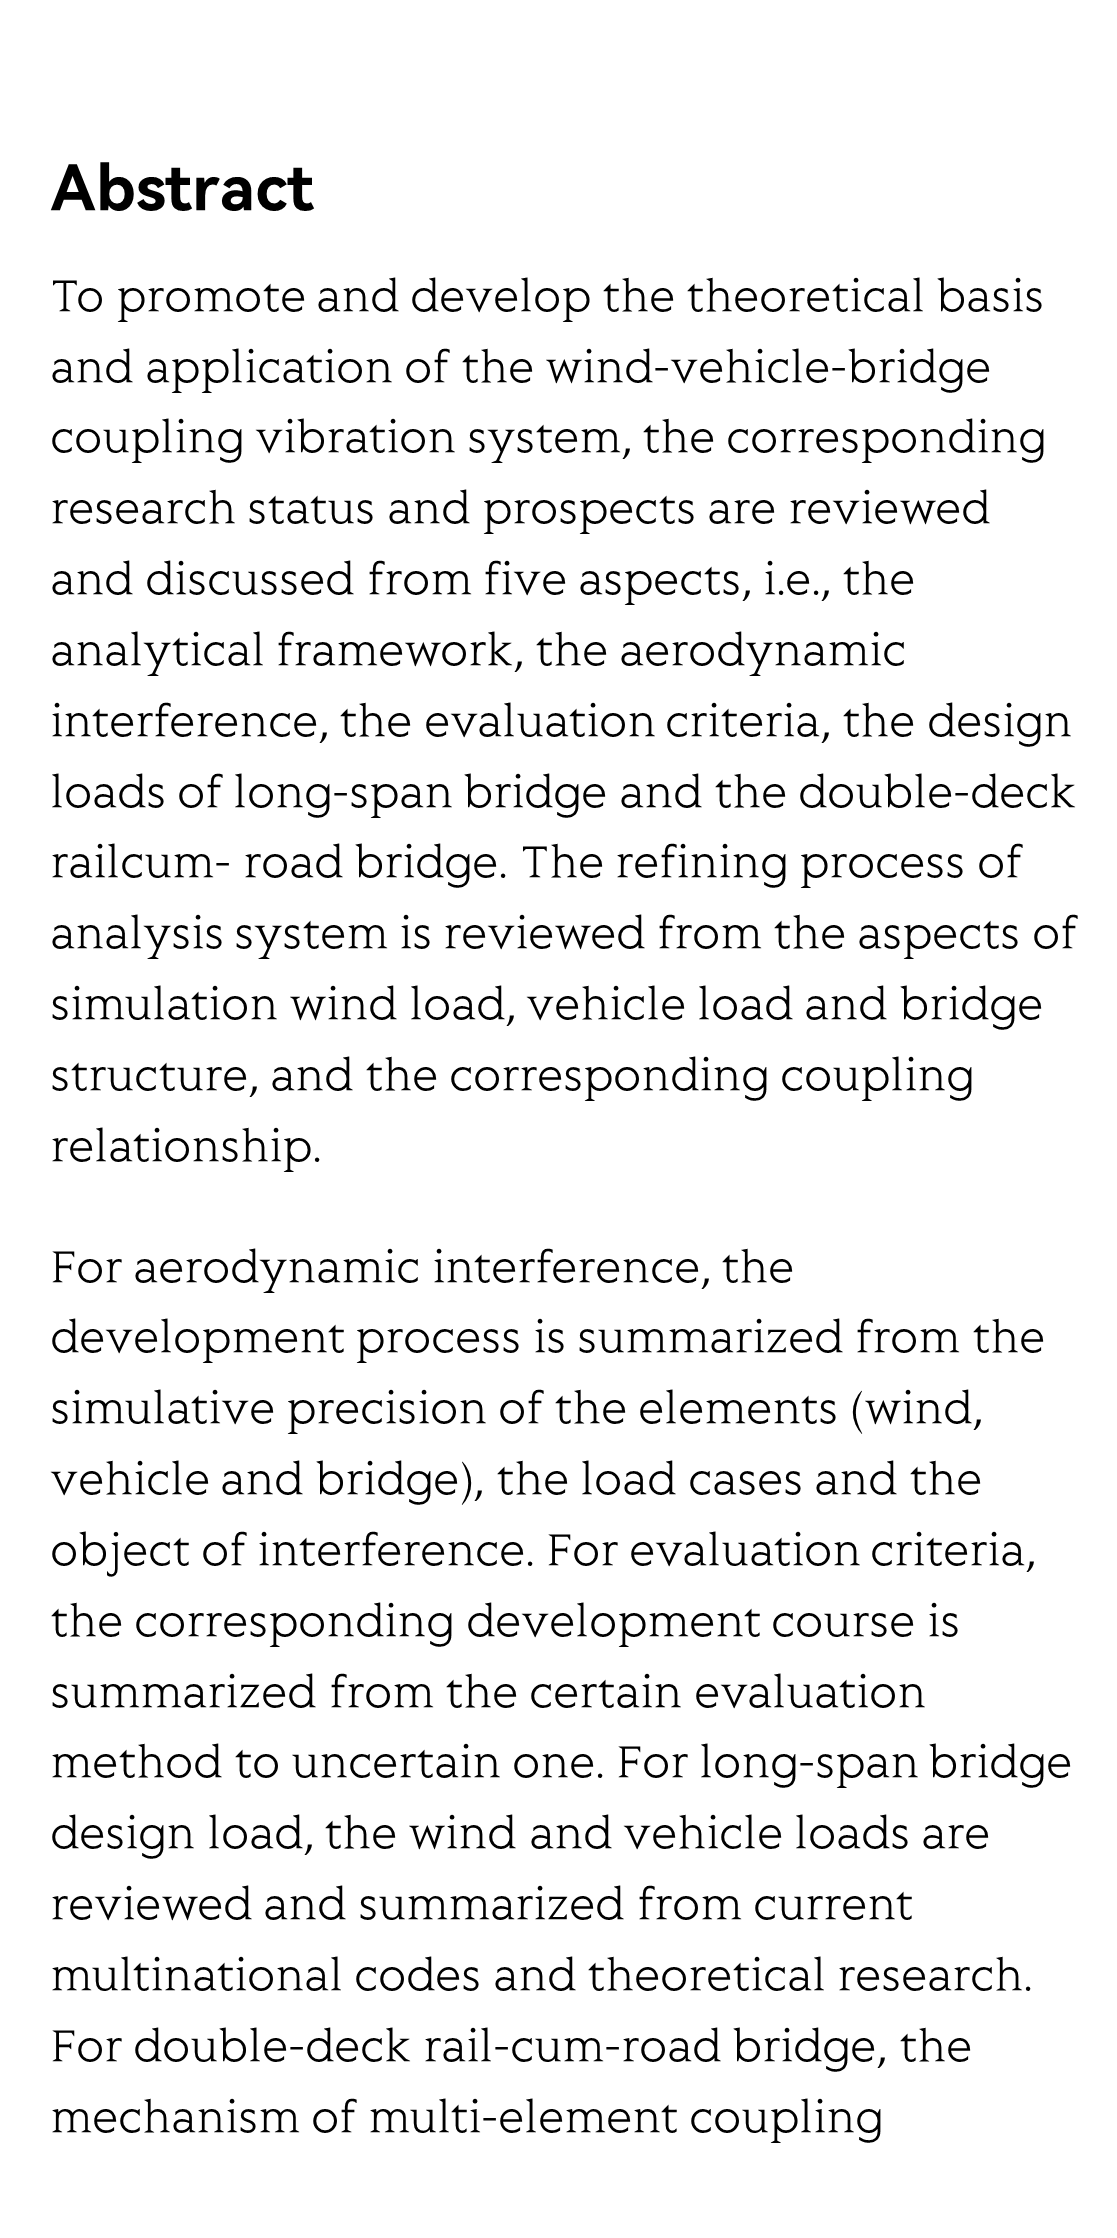 Research status and prospect of wind-vehicle-bridge coupling vibration system_2